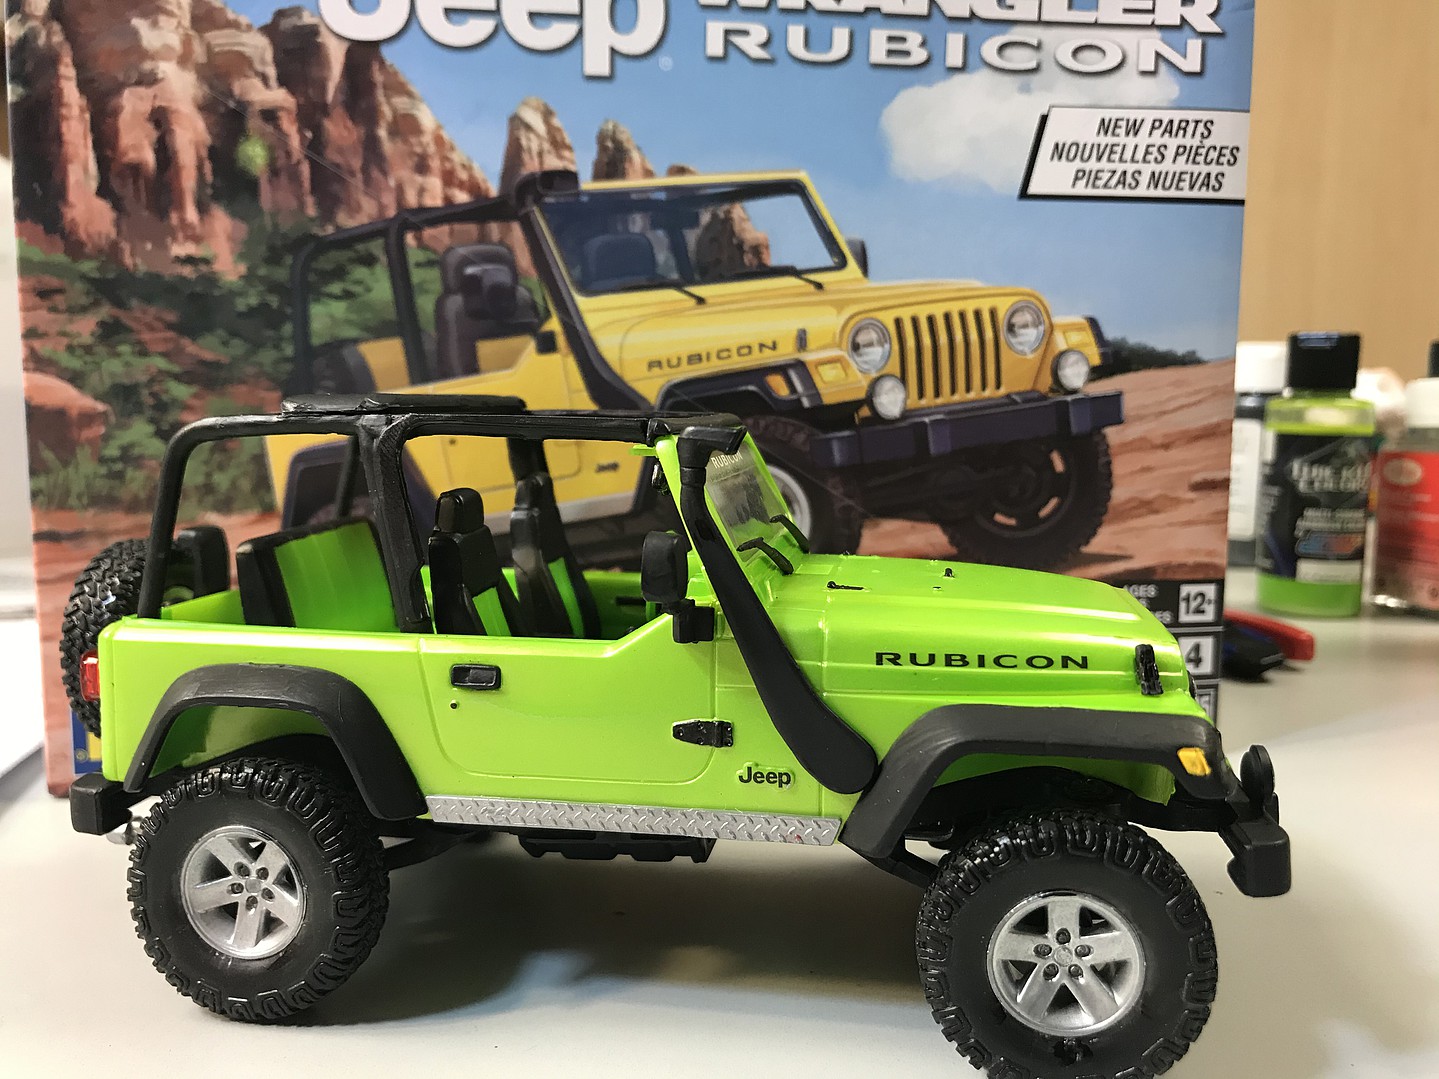 Jeep Wrangler Rubicon 1-25 pictures by wes1967